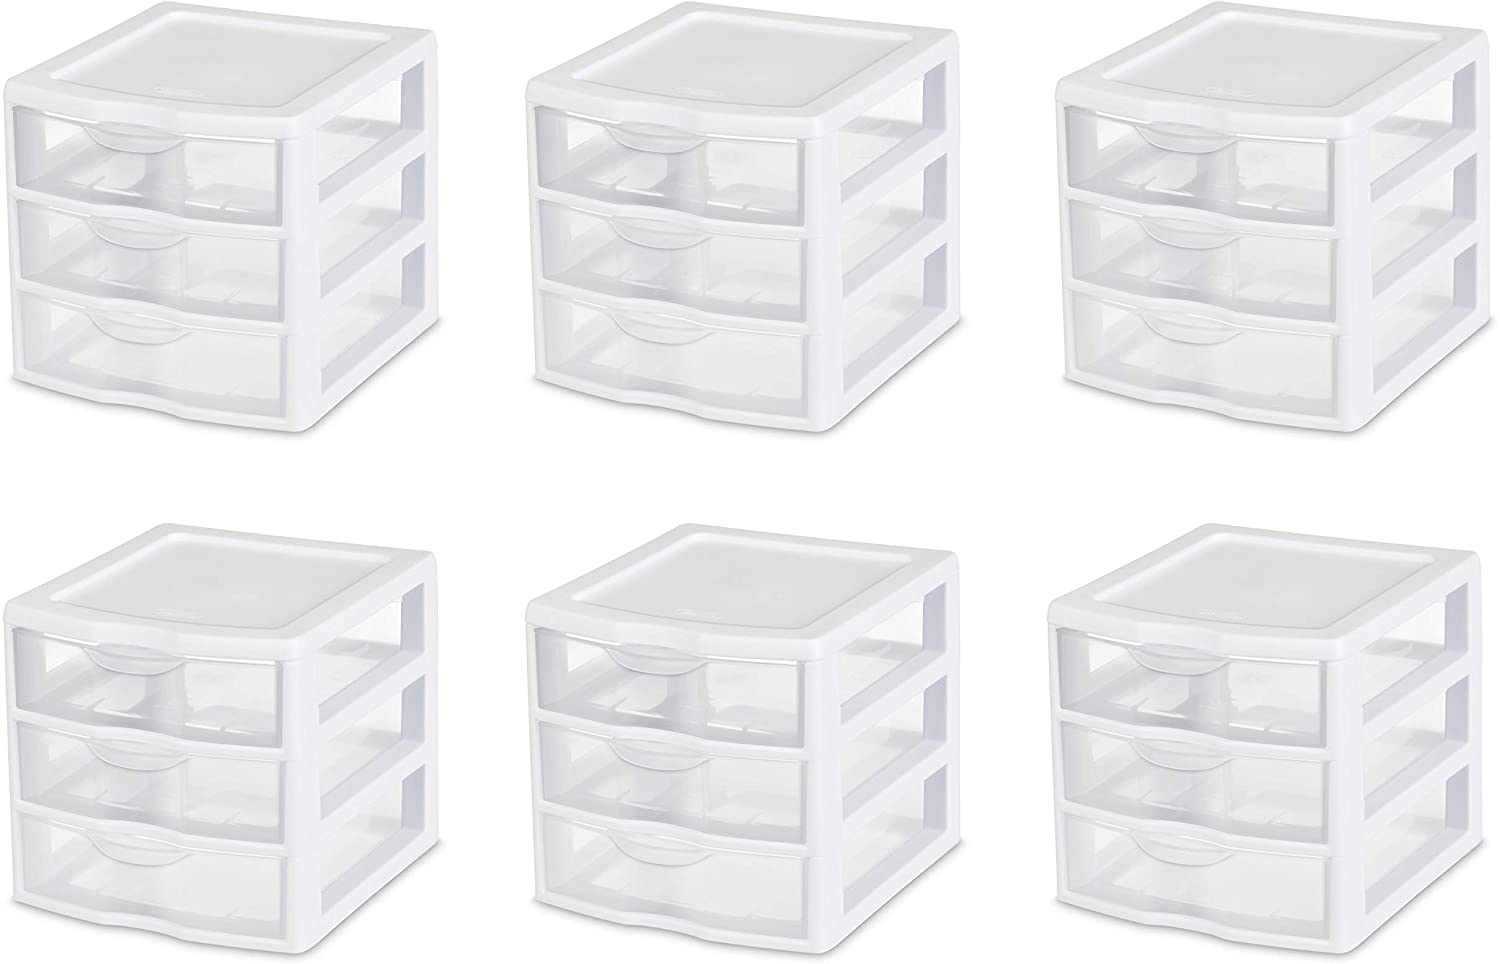 Sterilite 20738006 Small 3 Drawer Unit, White Frame with Clear Drawers, 6-Pack $14.97 at Amazon